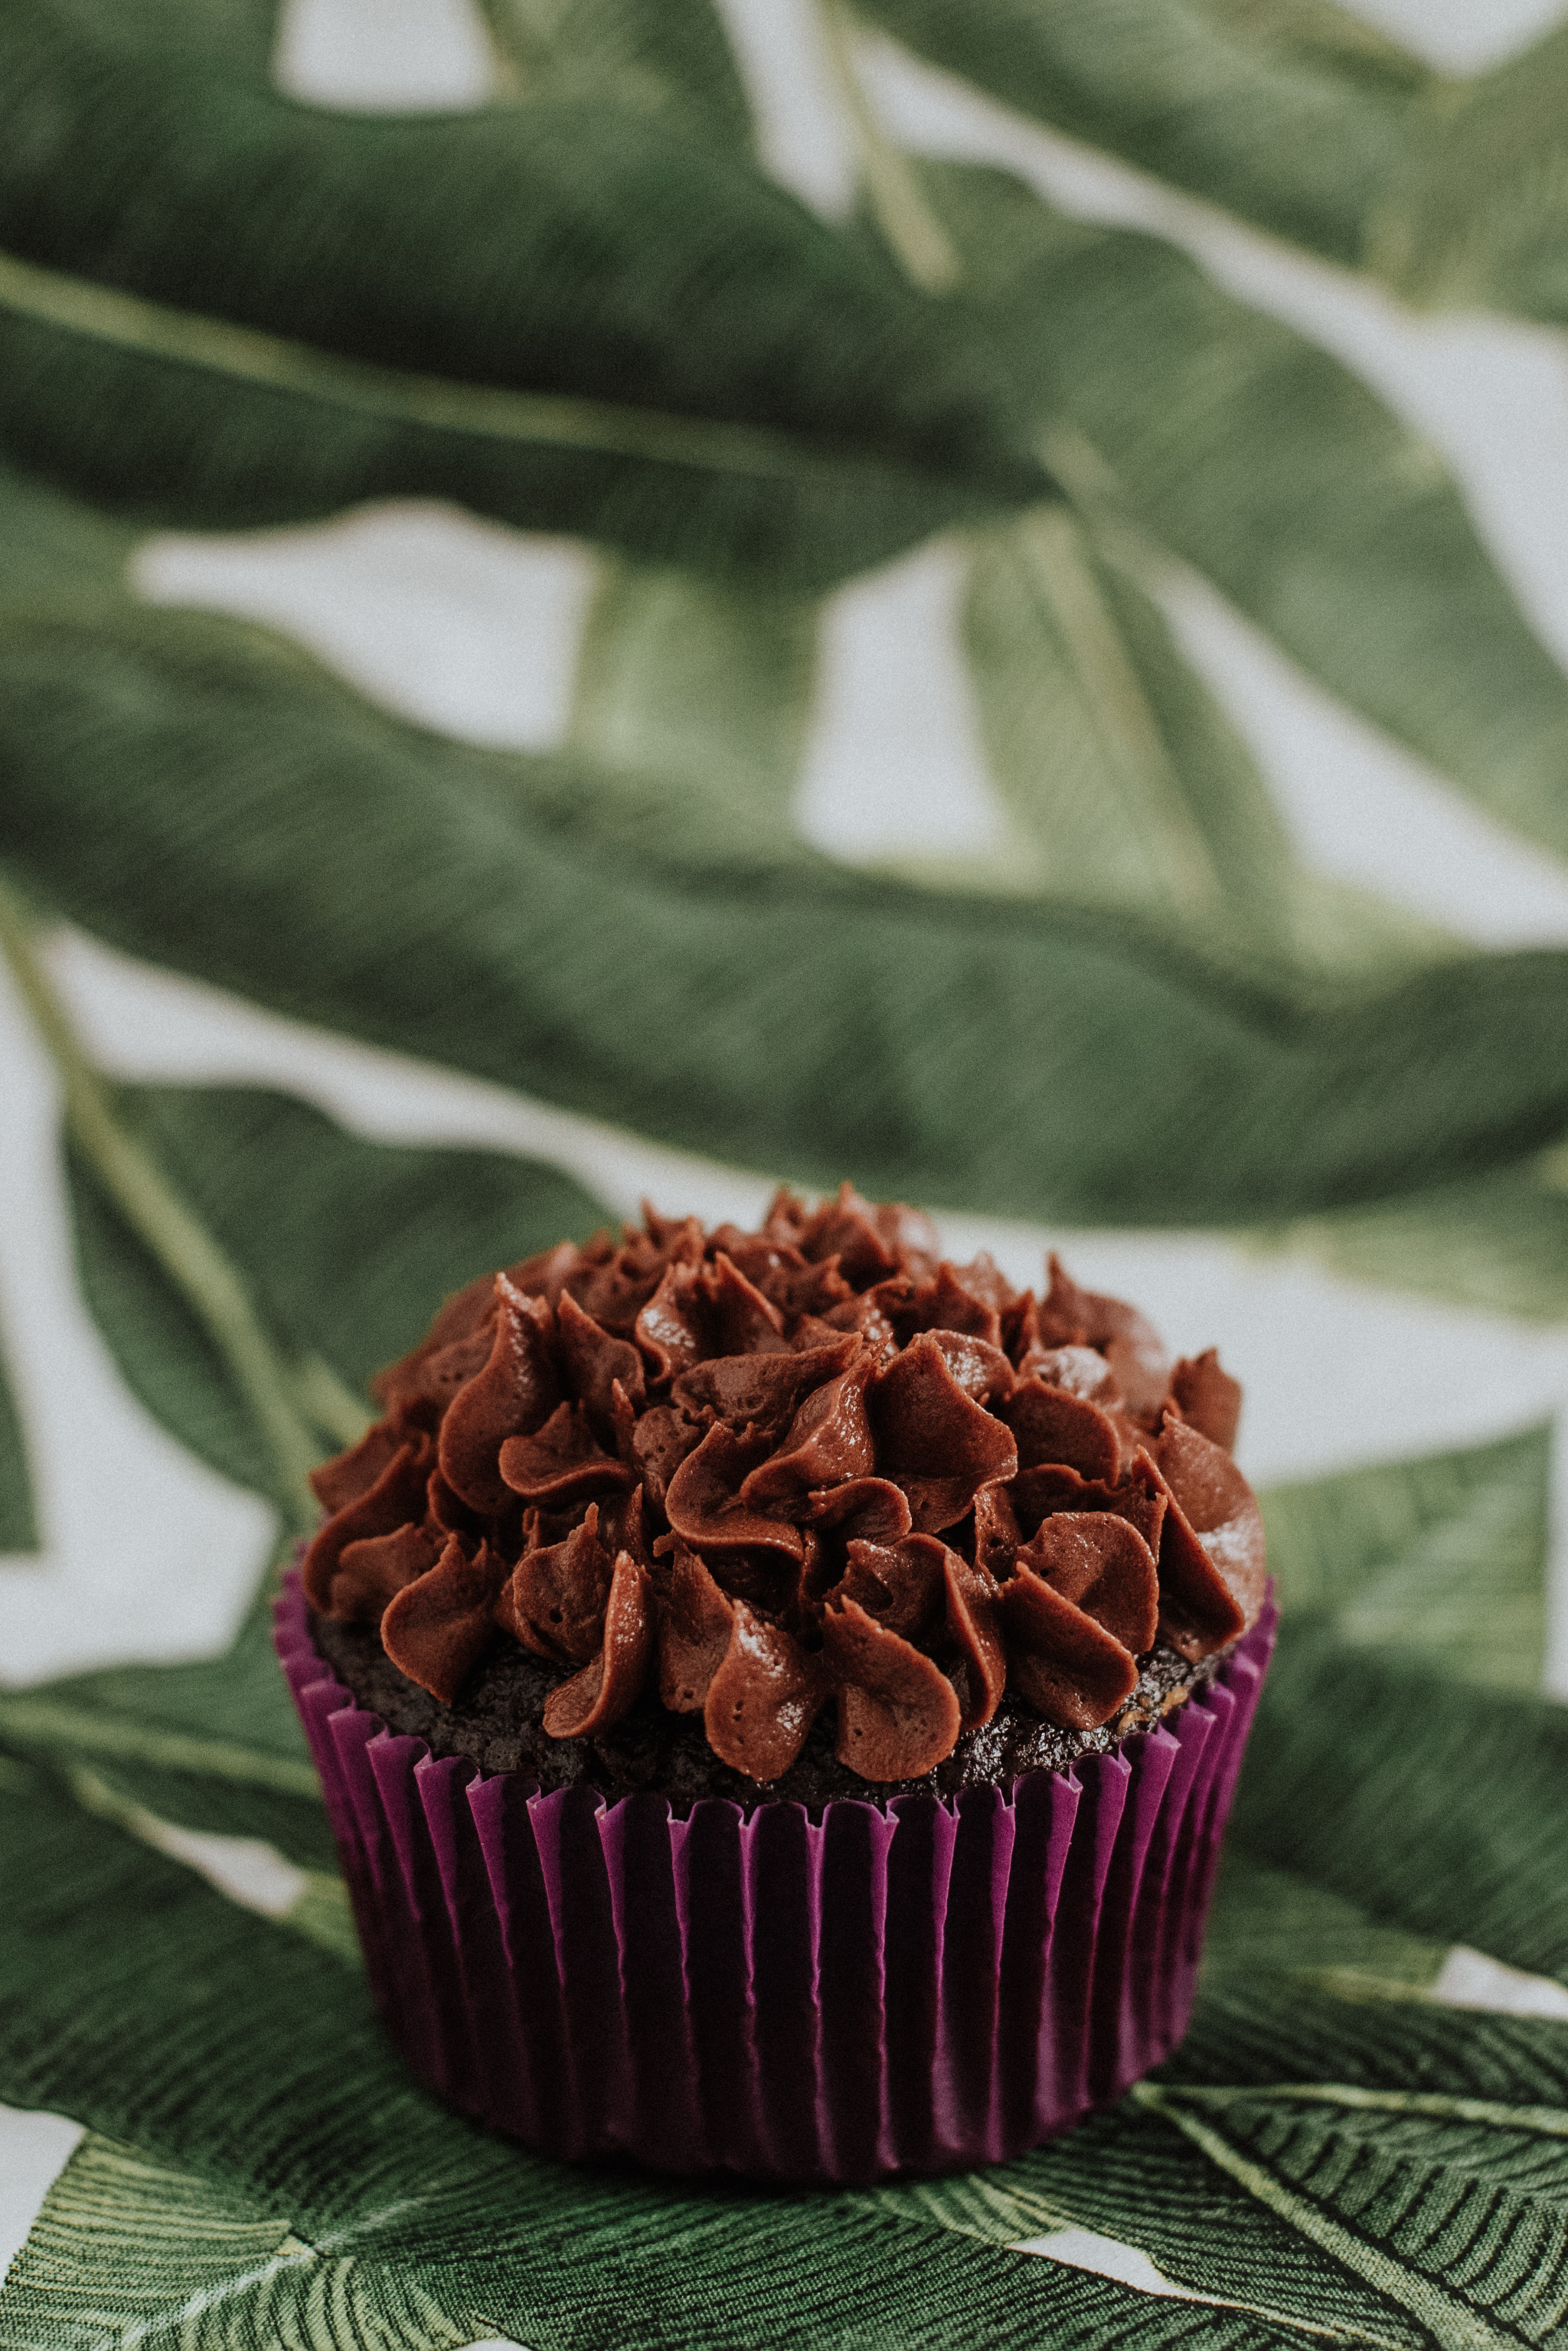 homemade chocolate cupcake in a plume color wrapper on a leaf background.